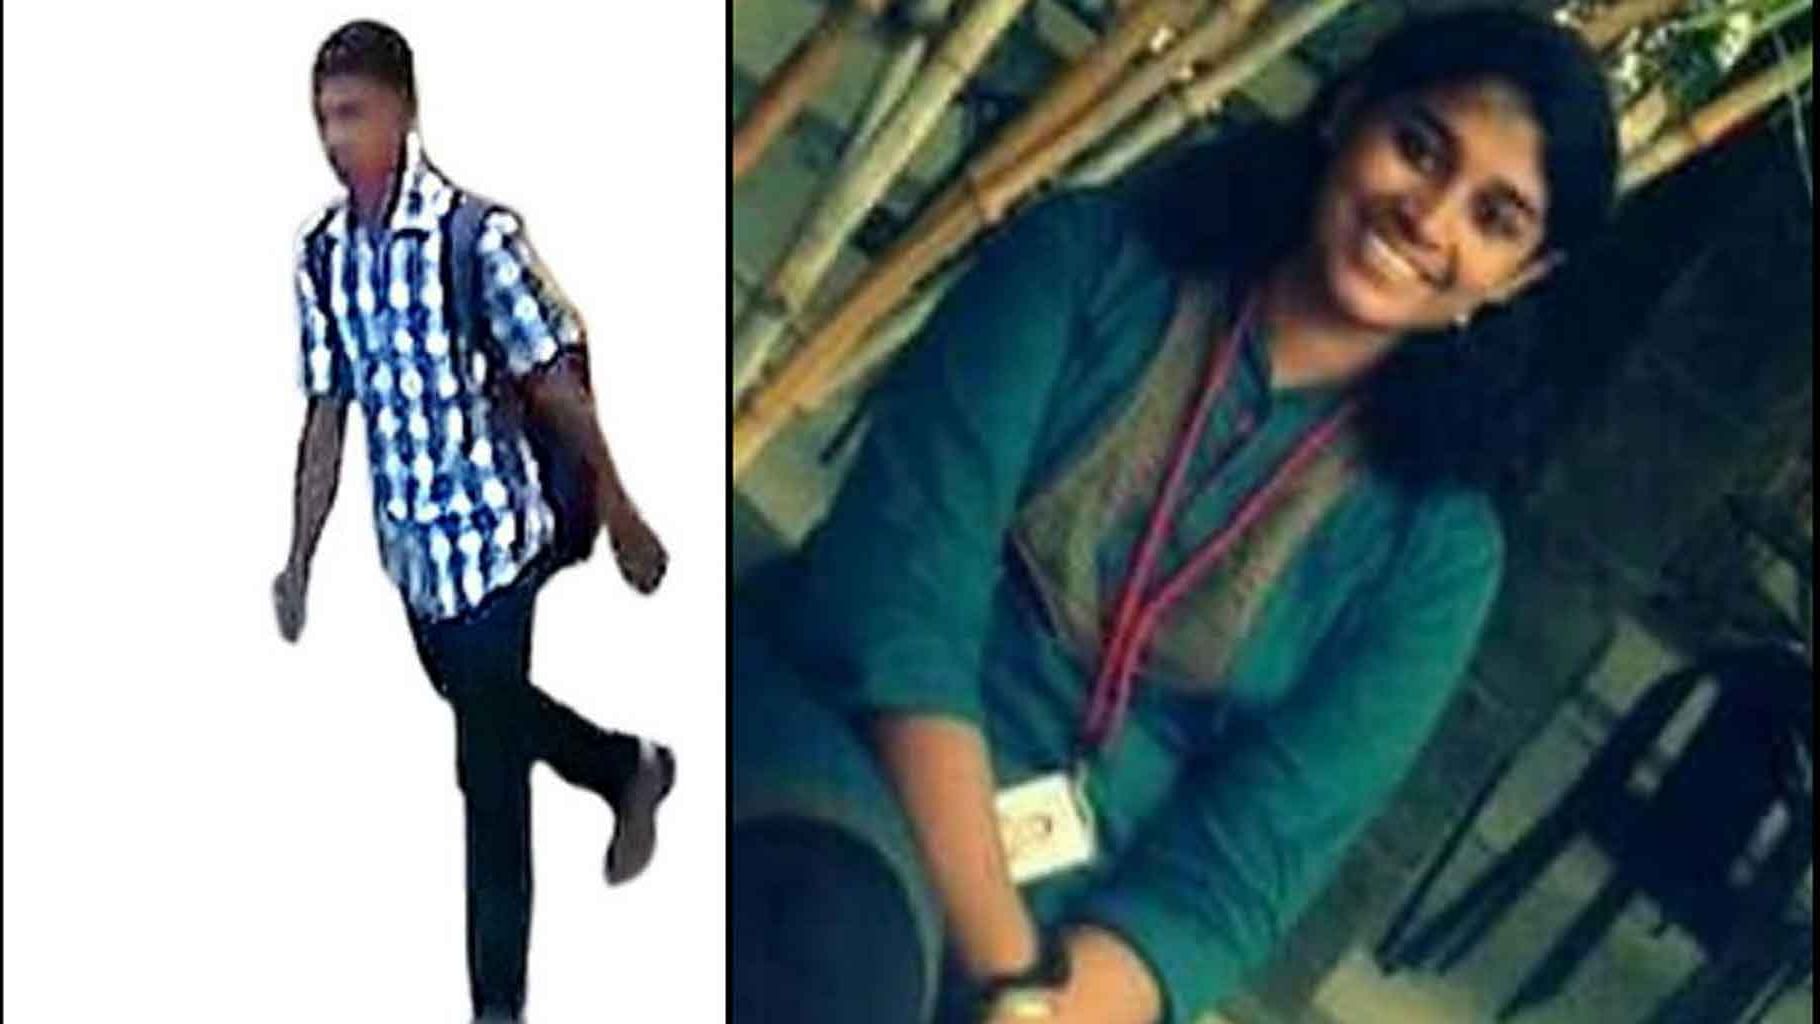 The suspect and Swathi. (Photo Courtesy: The News Minute)